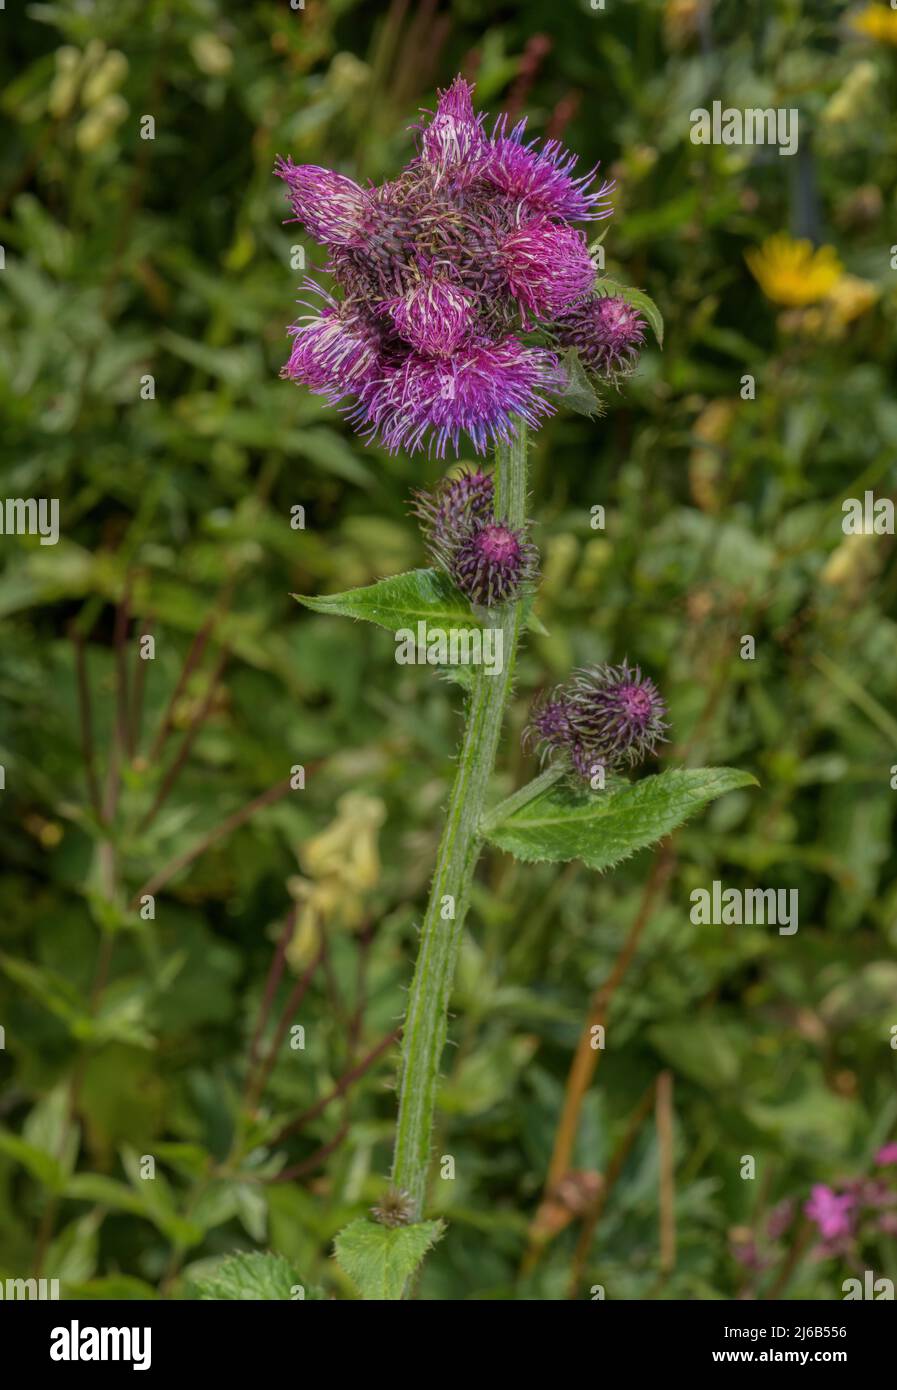 Great Marsh Thistle, Carduus personata, in flower in the Alps. Stock Photo